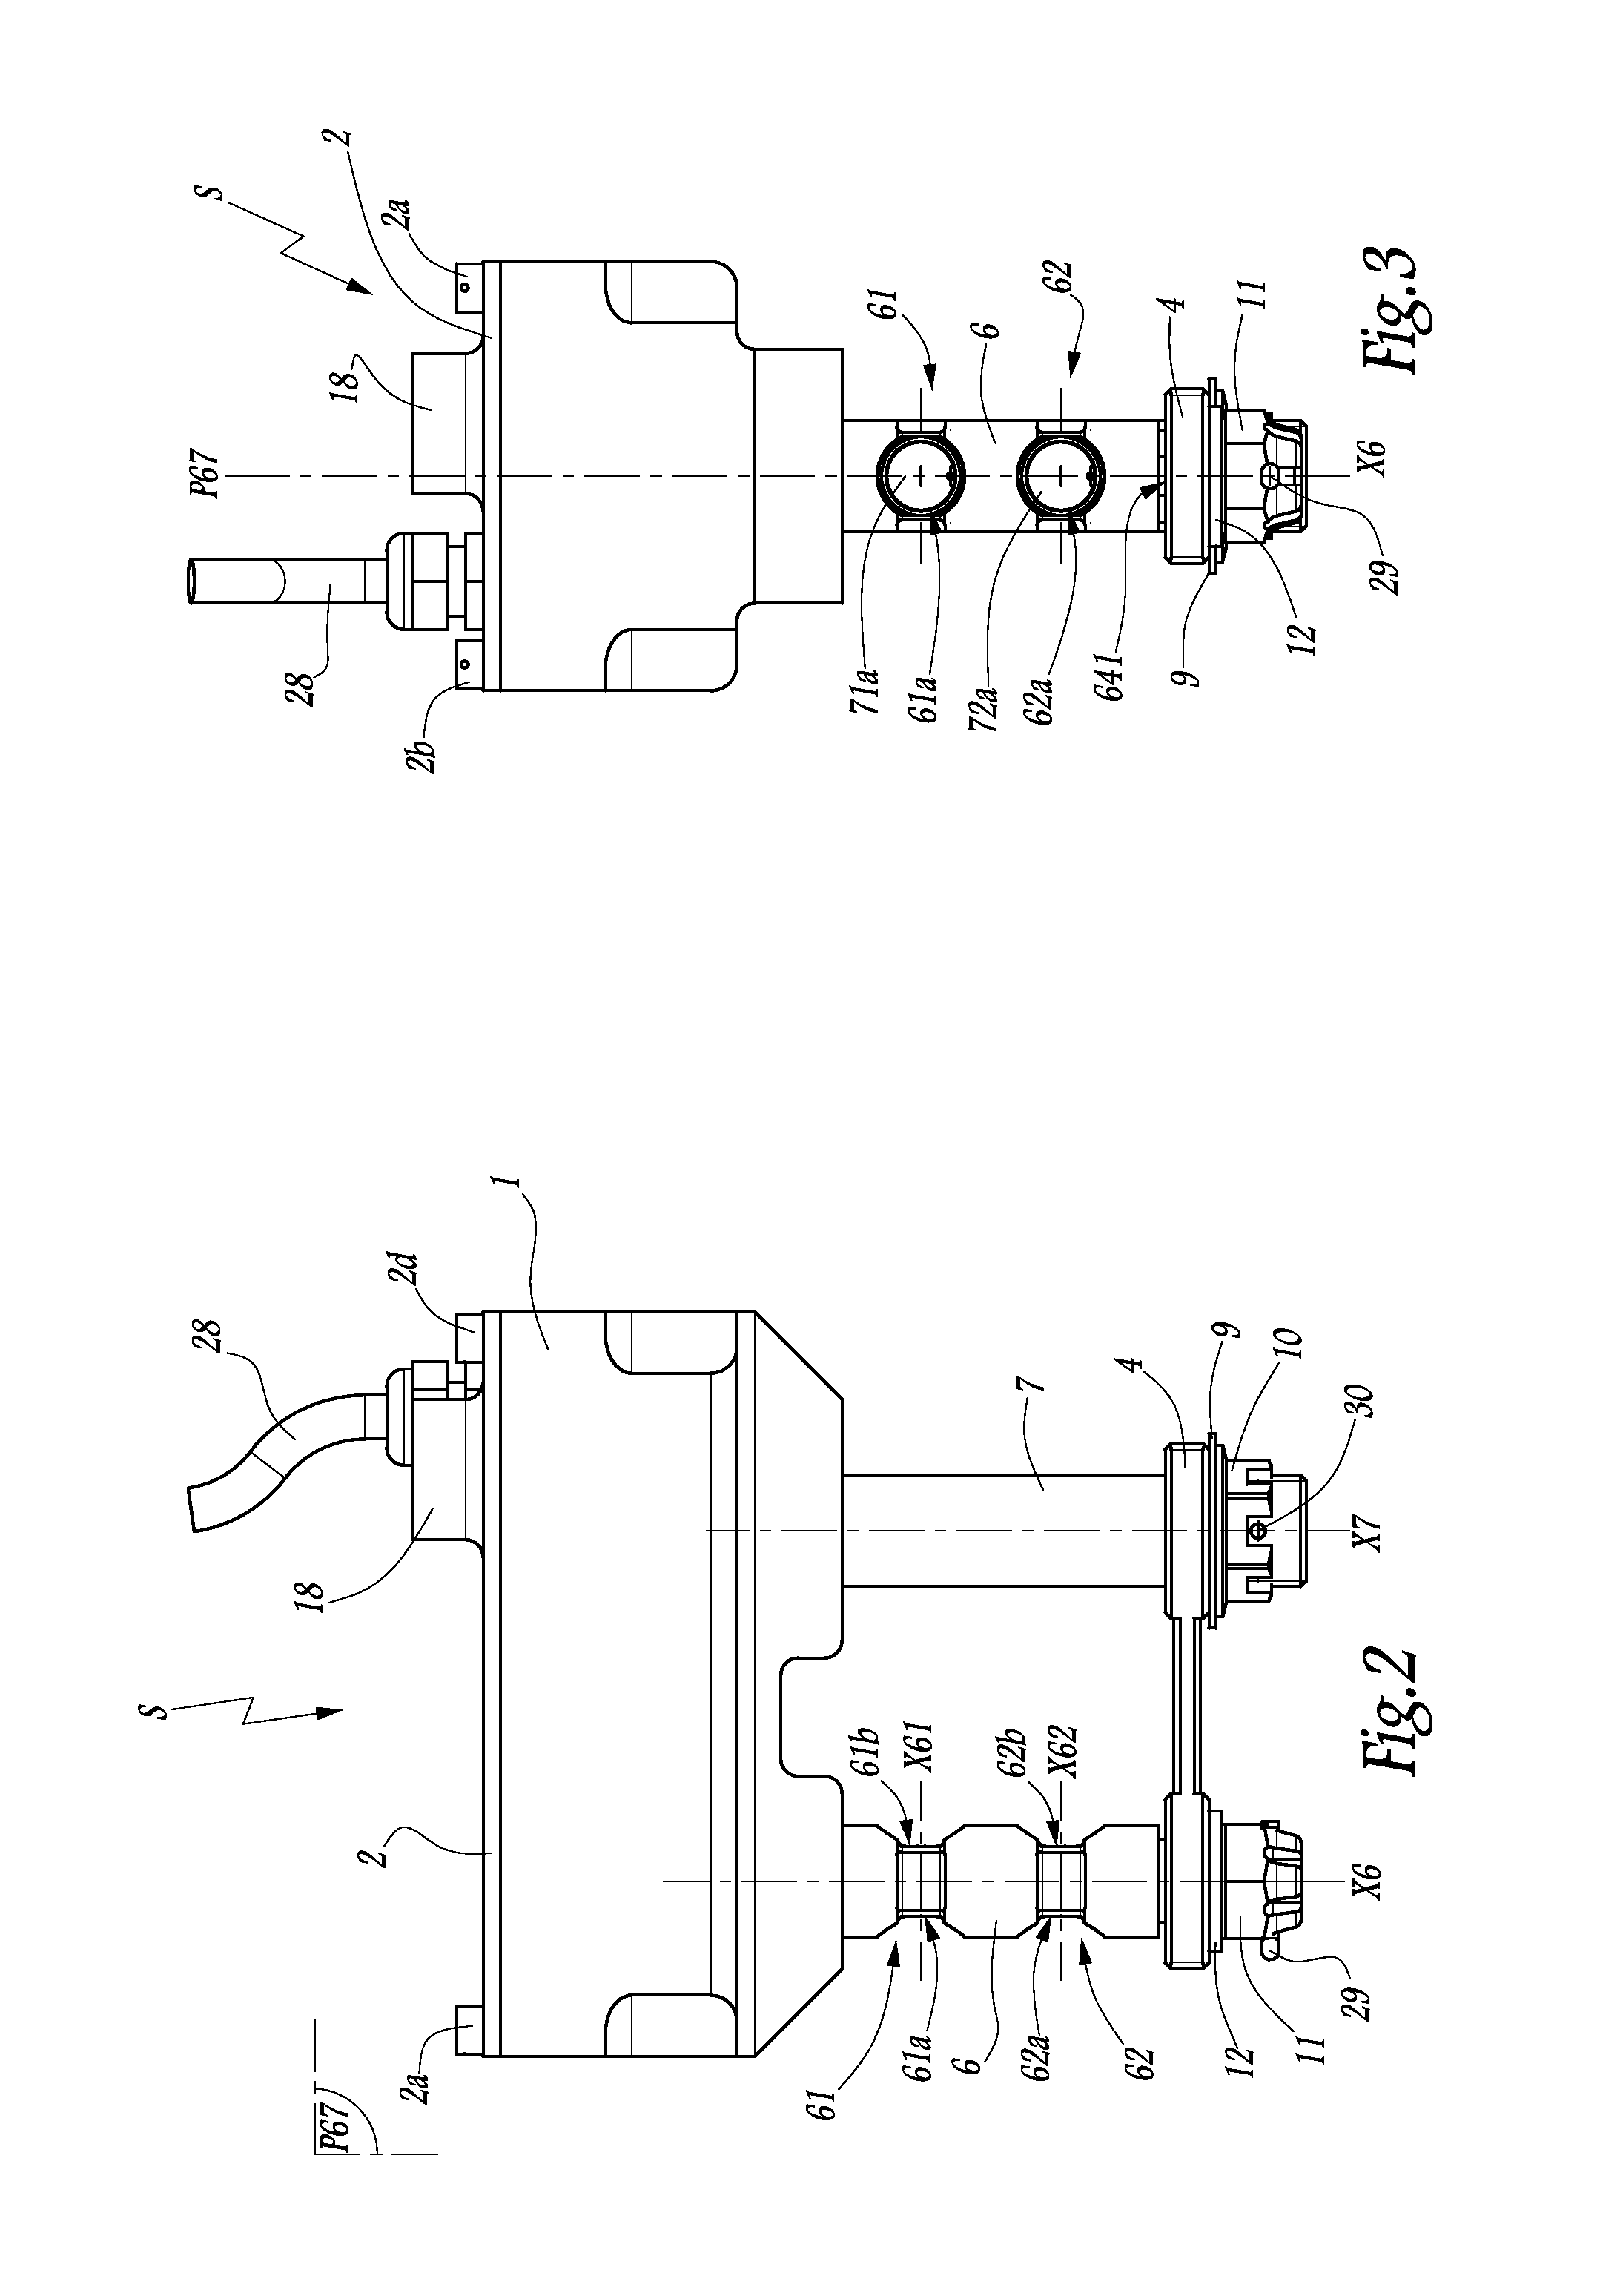 Flight unit control system, flight control device including such a system, and use of such a system